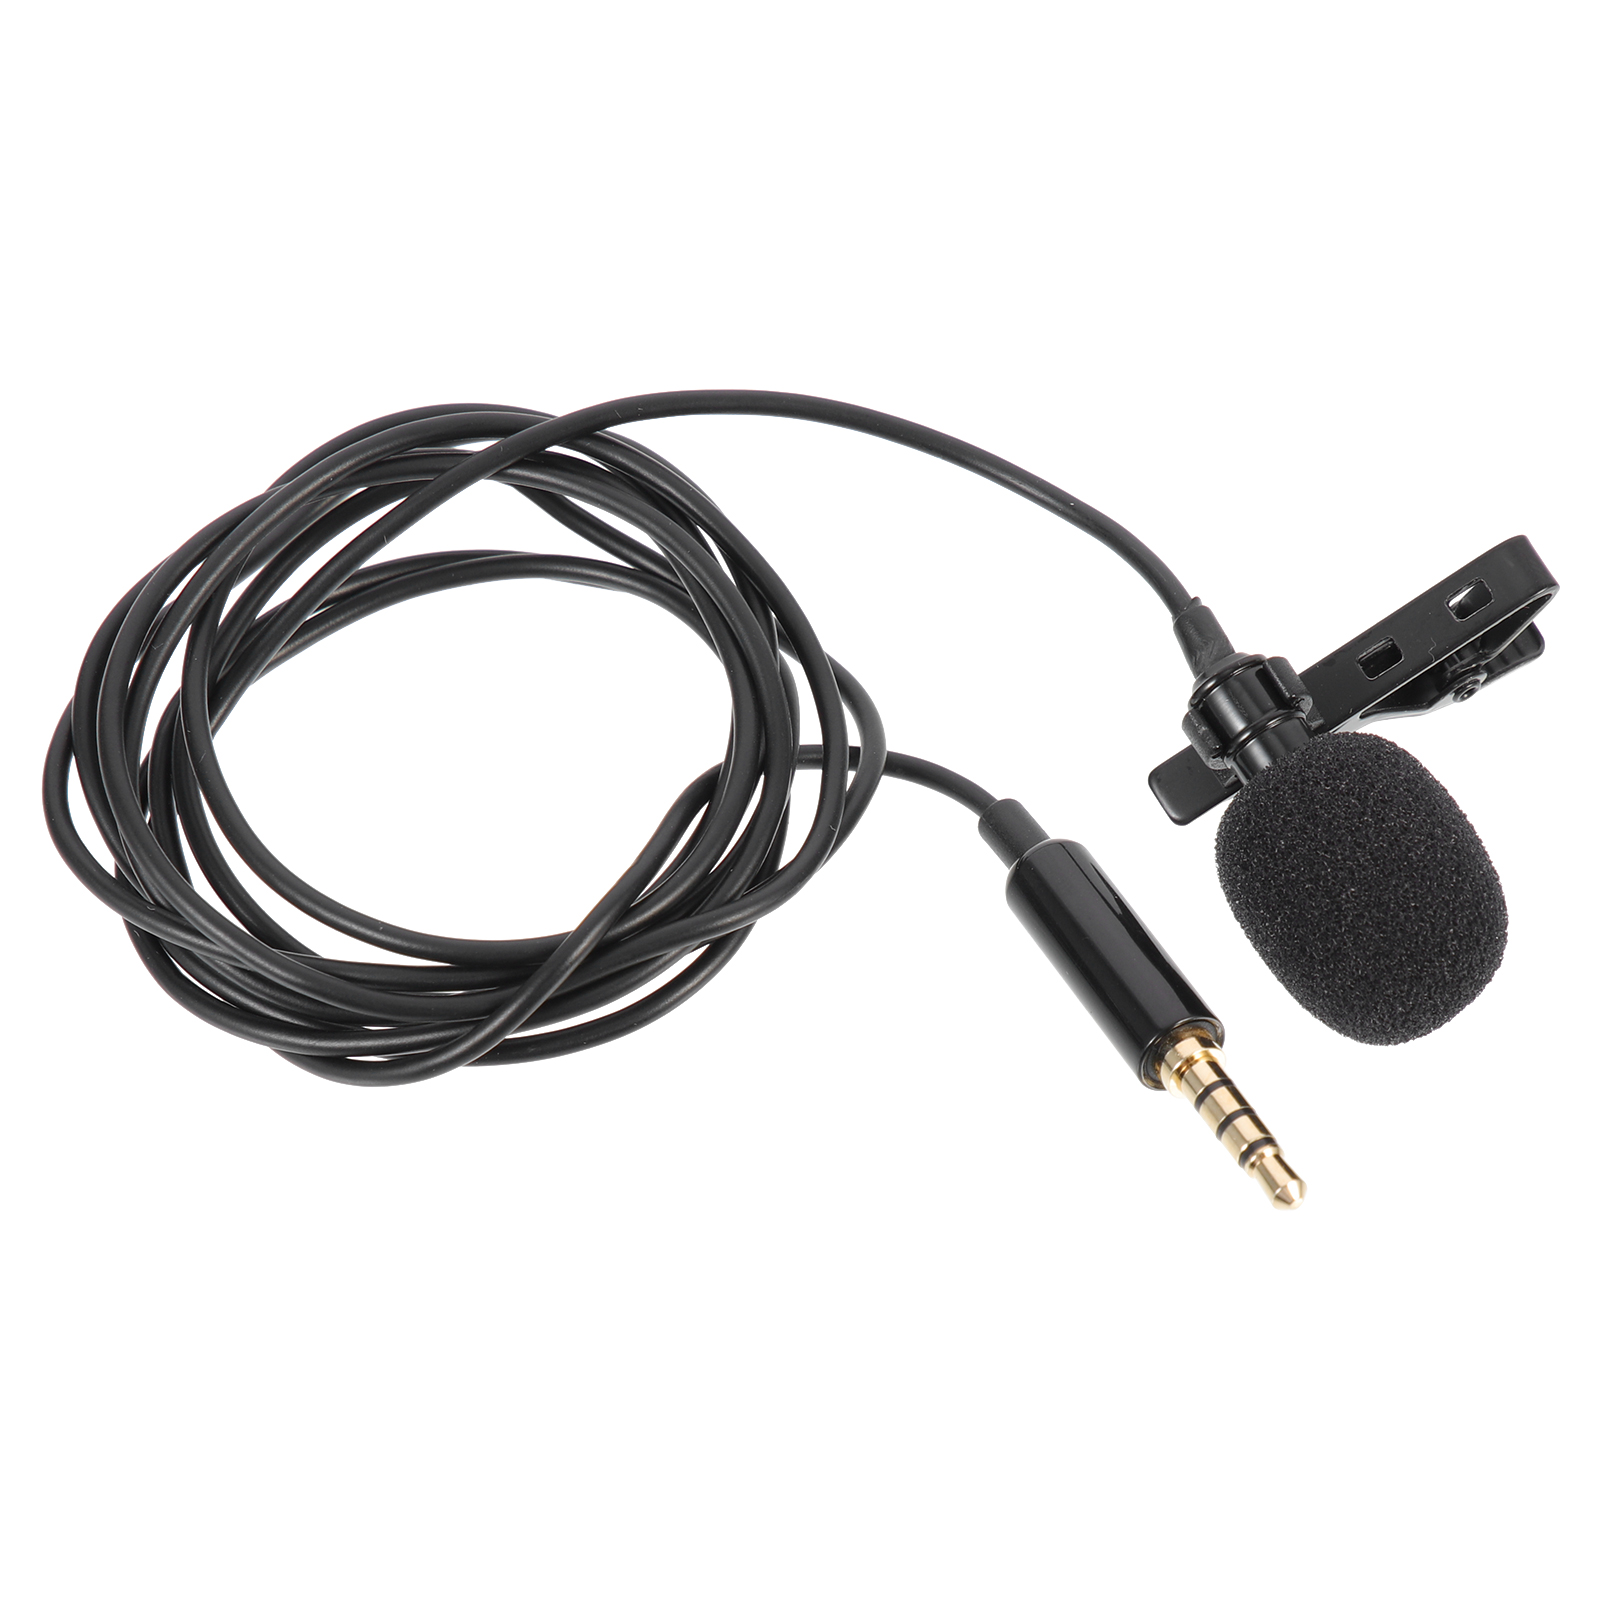 Lavalier Microphone Clip On Microphone 3.5mm Recording Microphone Lapel Mic - image 5 of 9